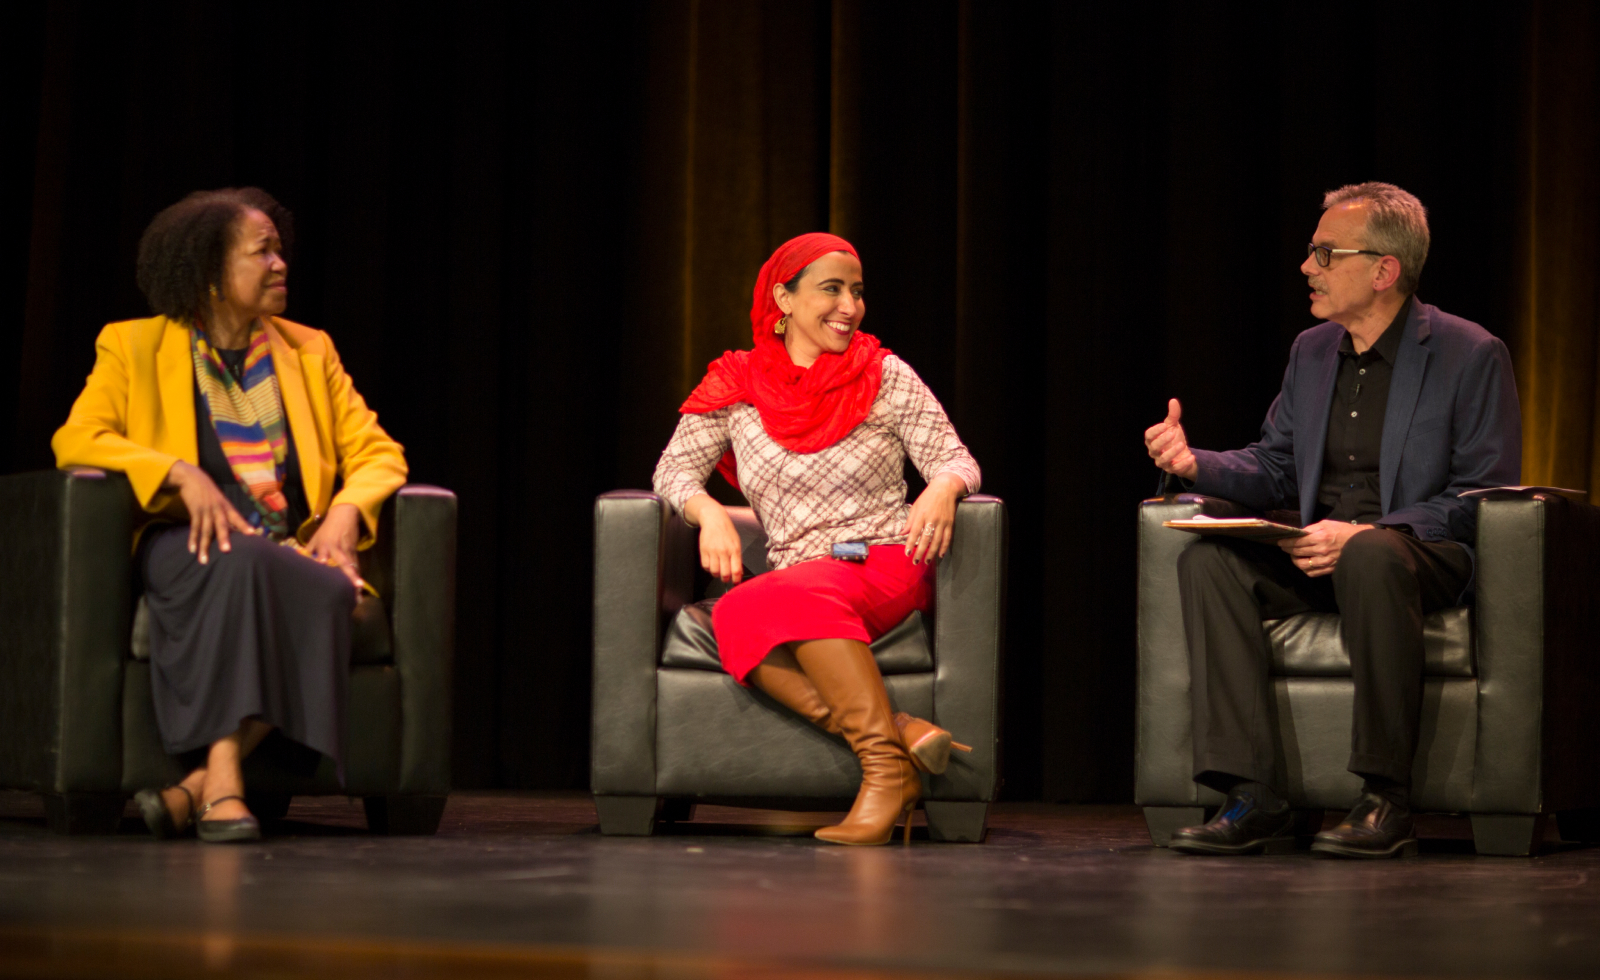 Three people sit in chairs on a stage during a discussion